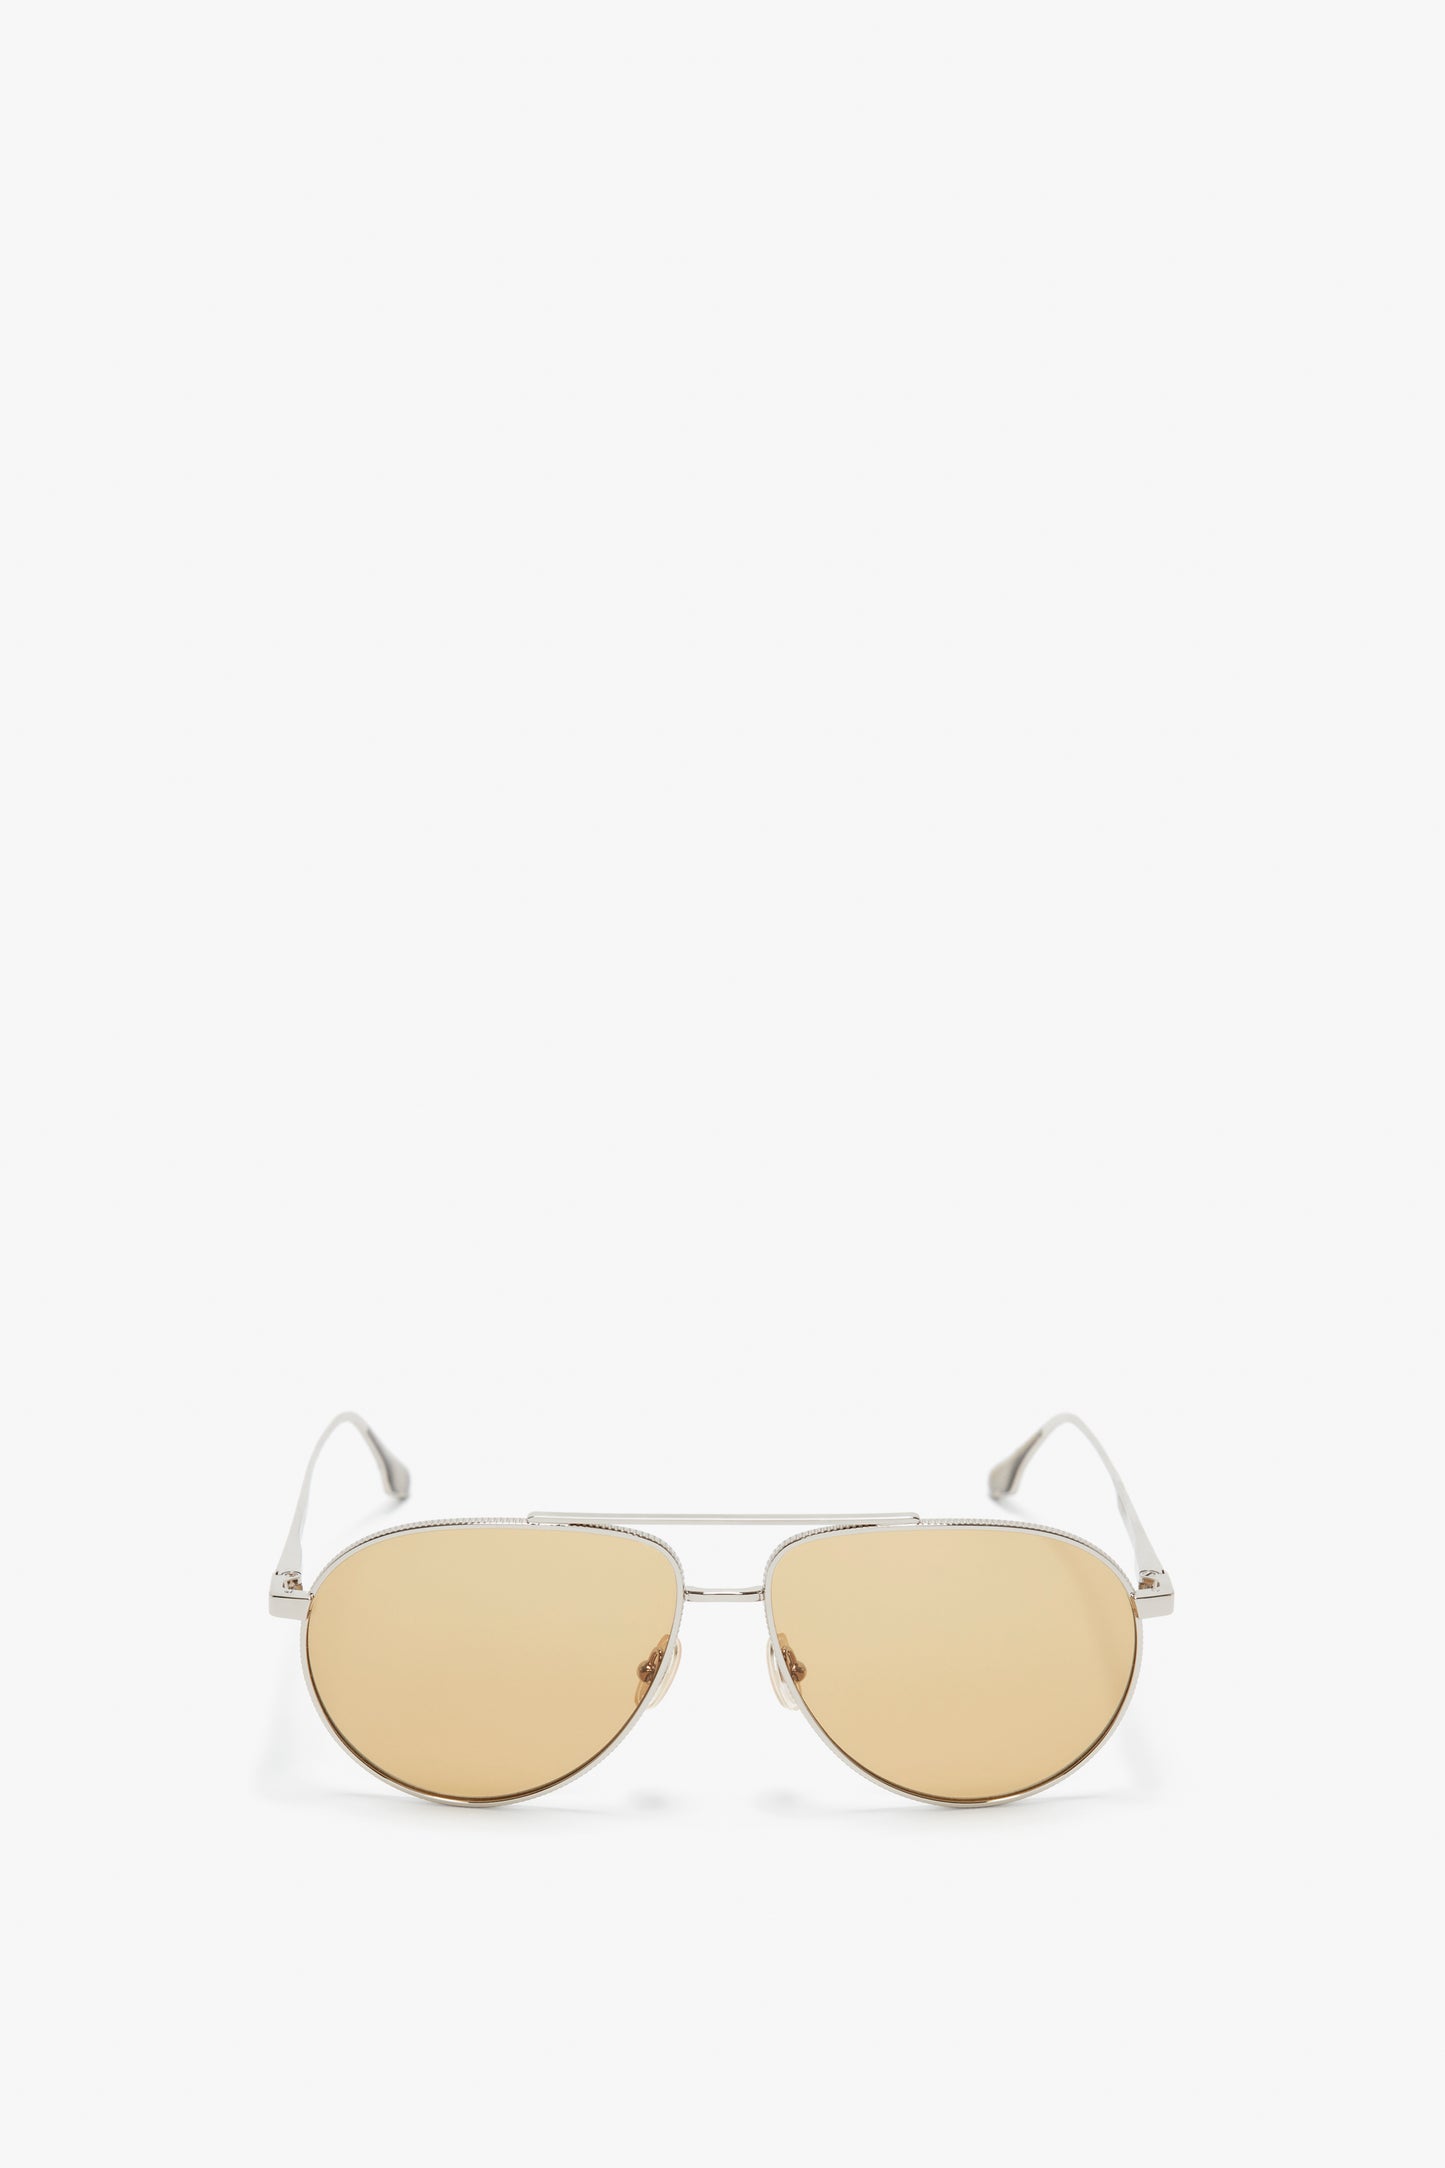 A pair of Victoria Beckham aviator sunglasses with thin metal frames and light amber-tinted lenses, featuring adjustable nose pads, isolated on a white background.